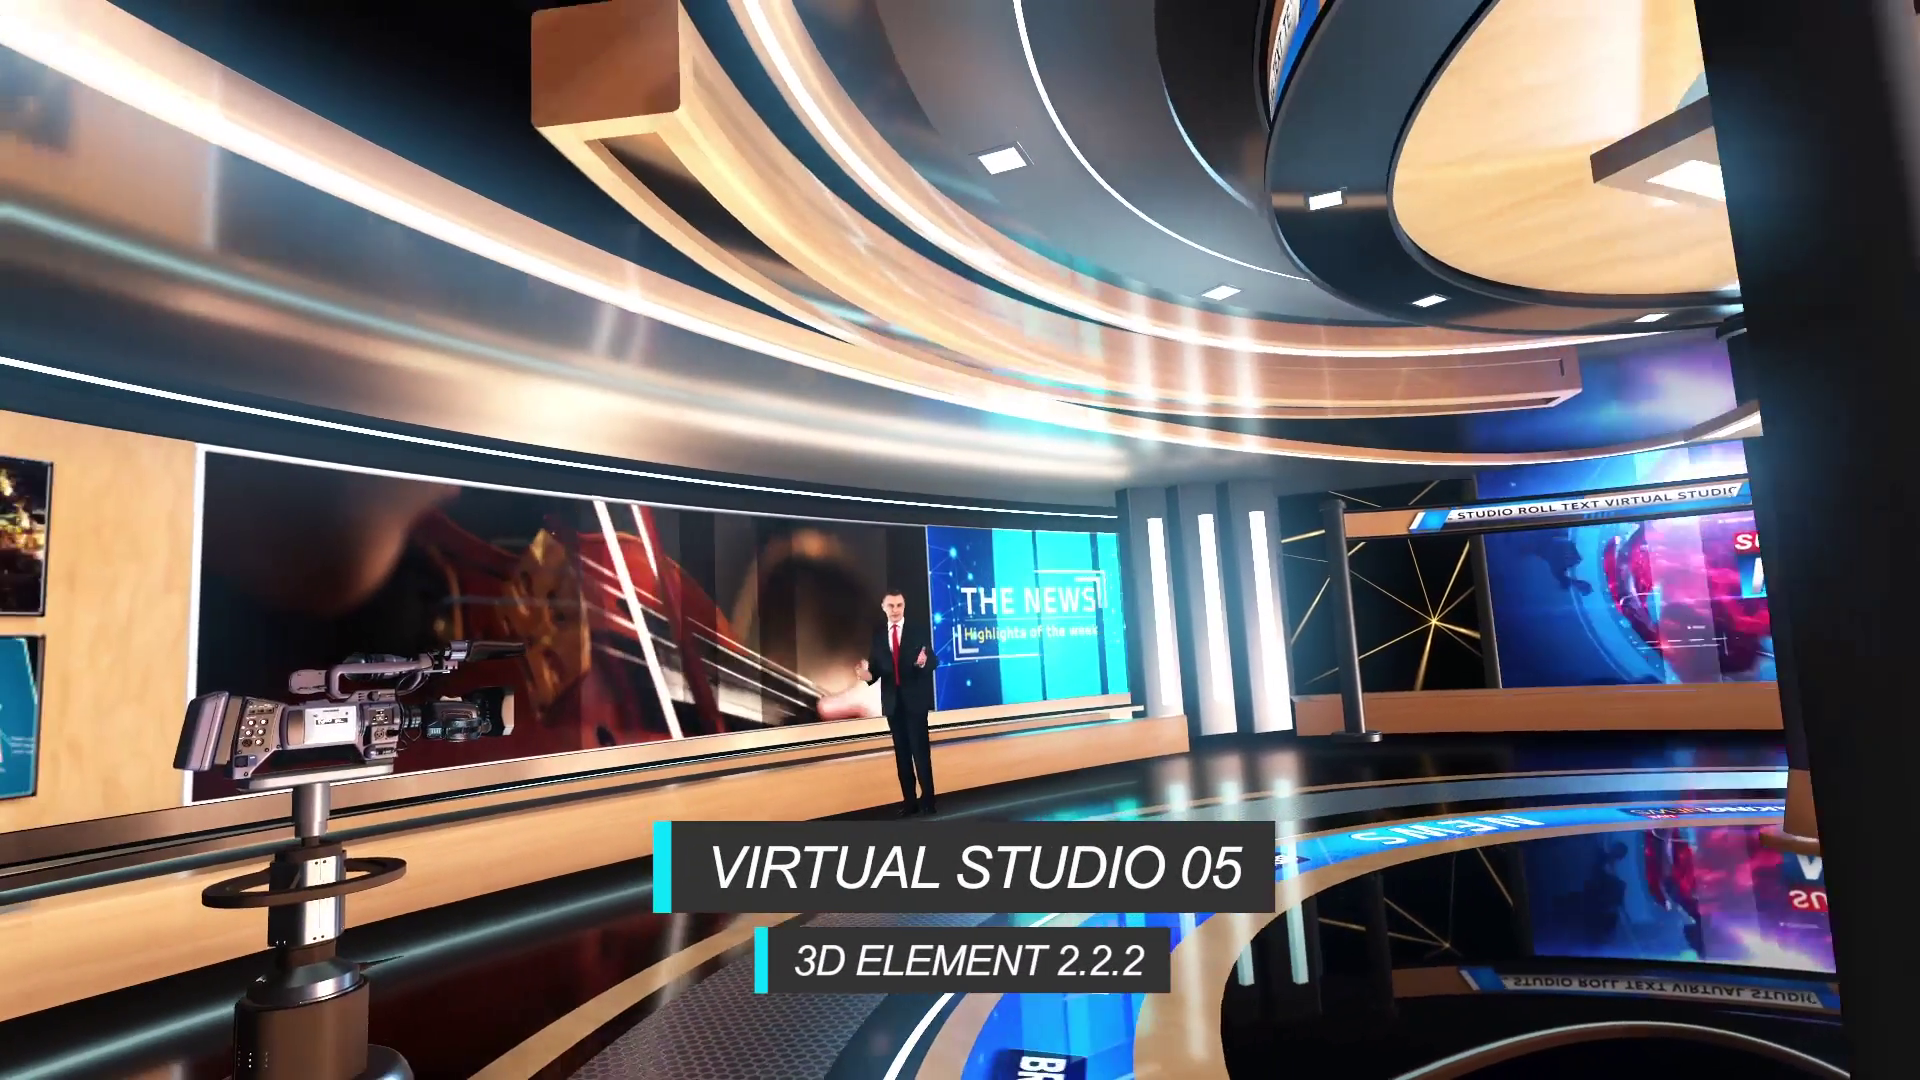 Videohive Virtual Studio 05 – Free Adobe After Effects Templates Download